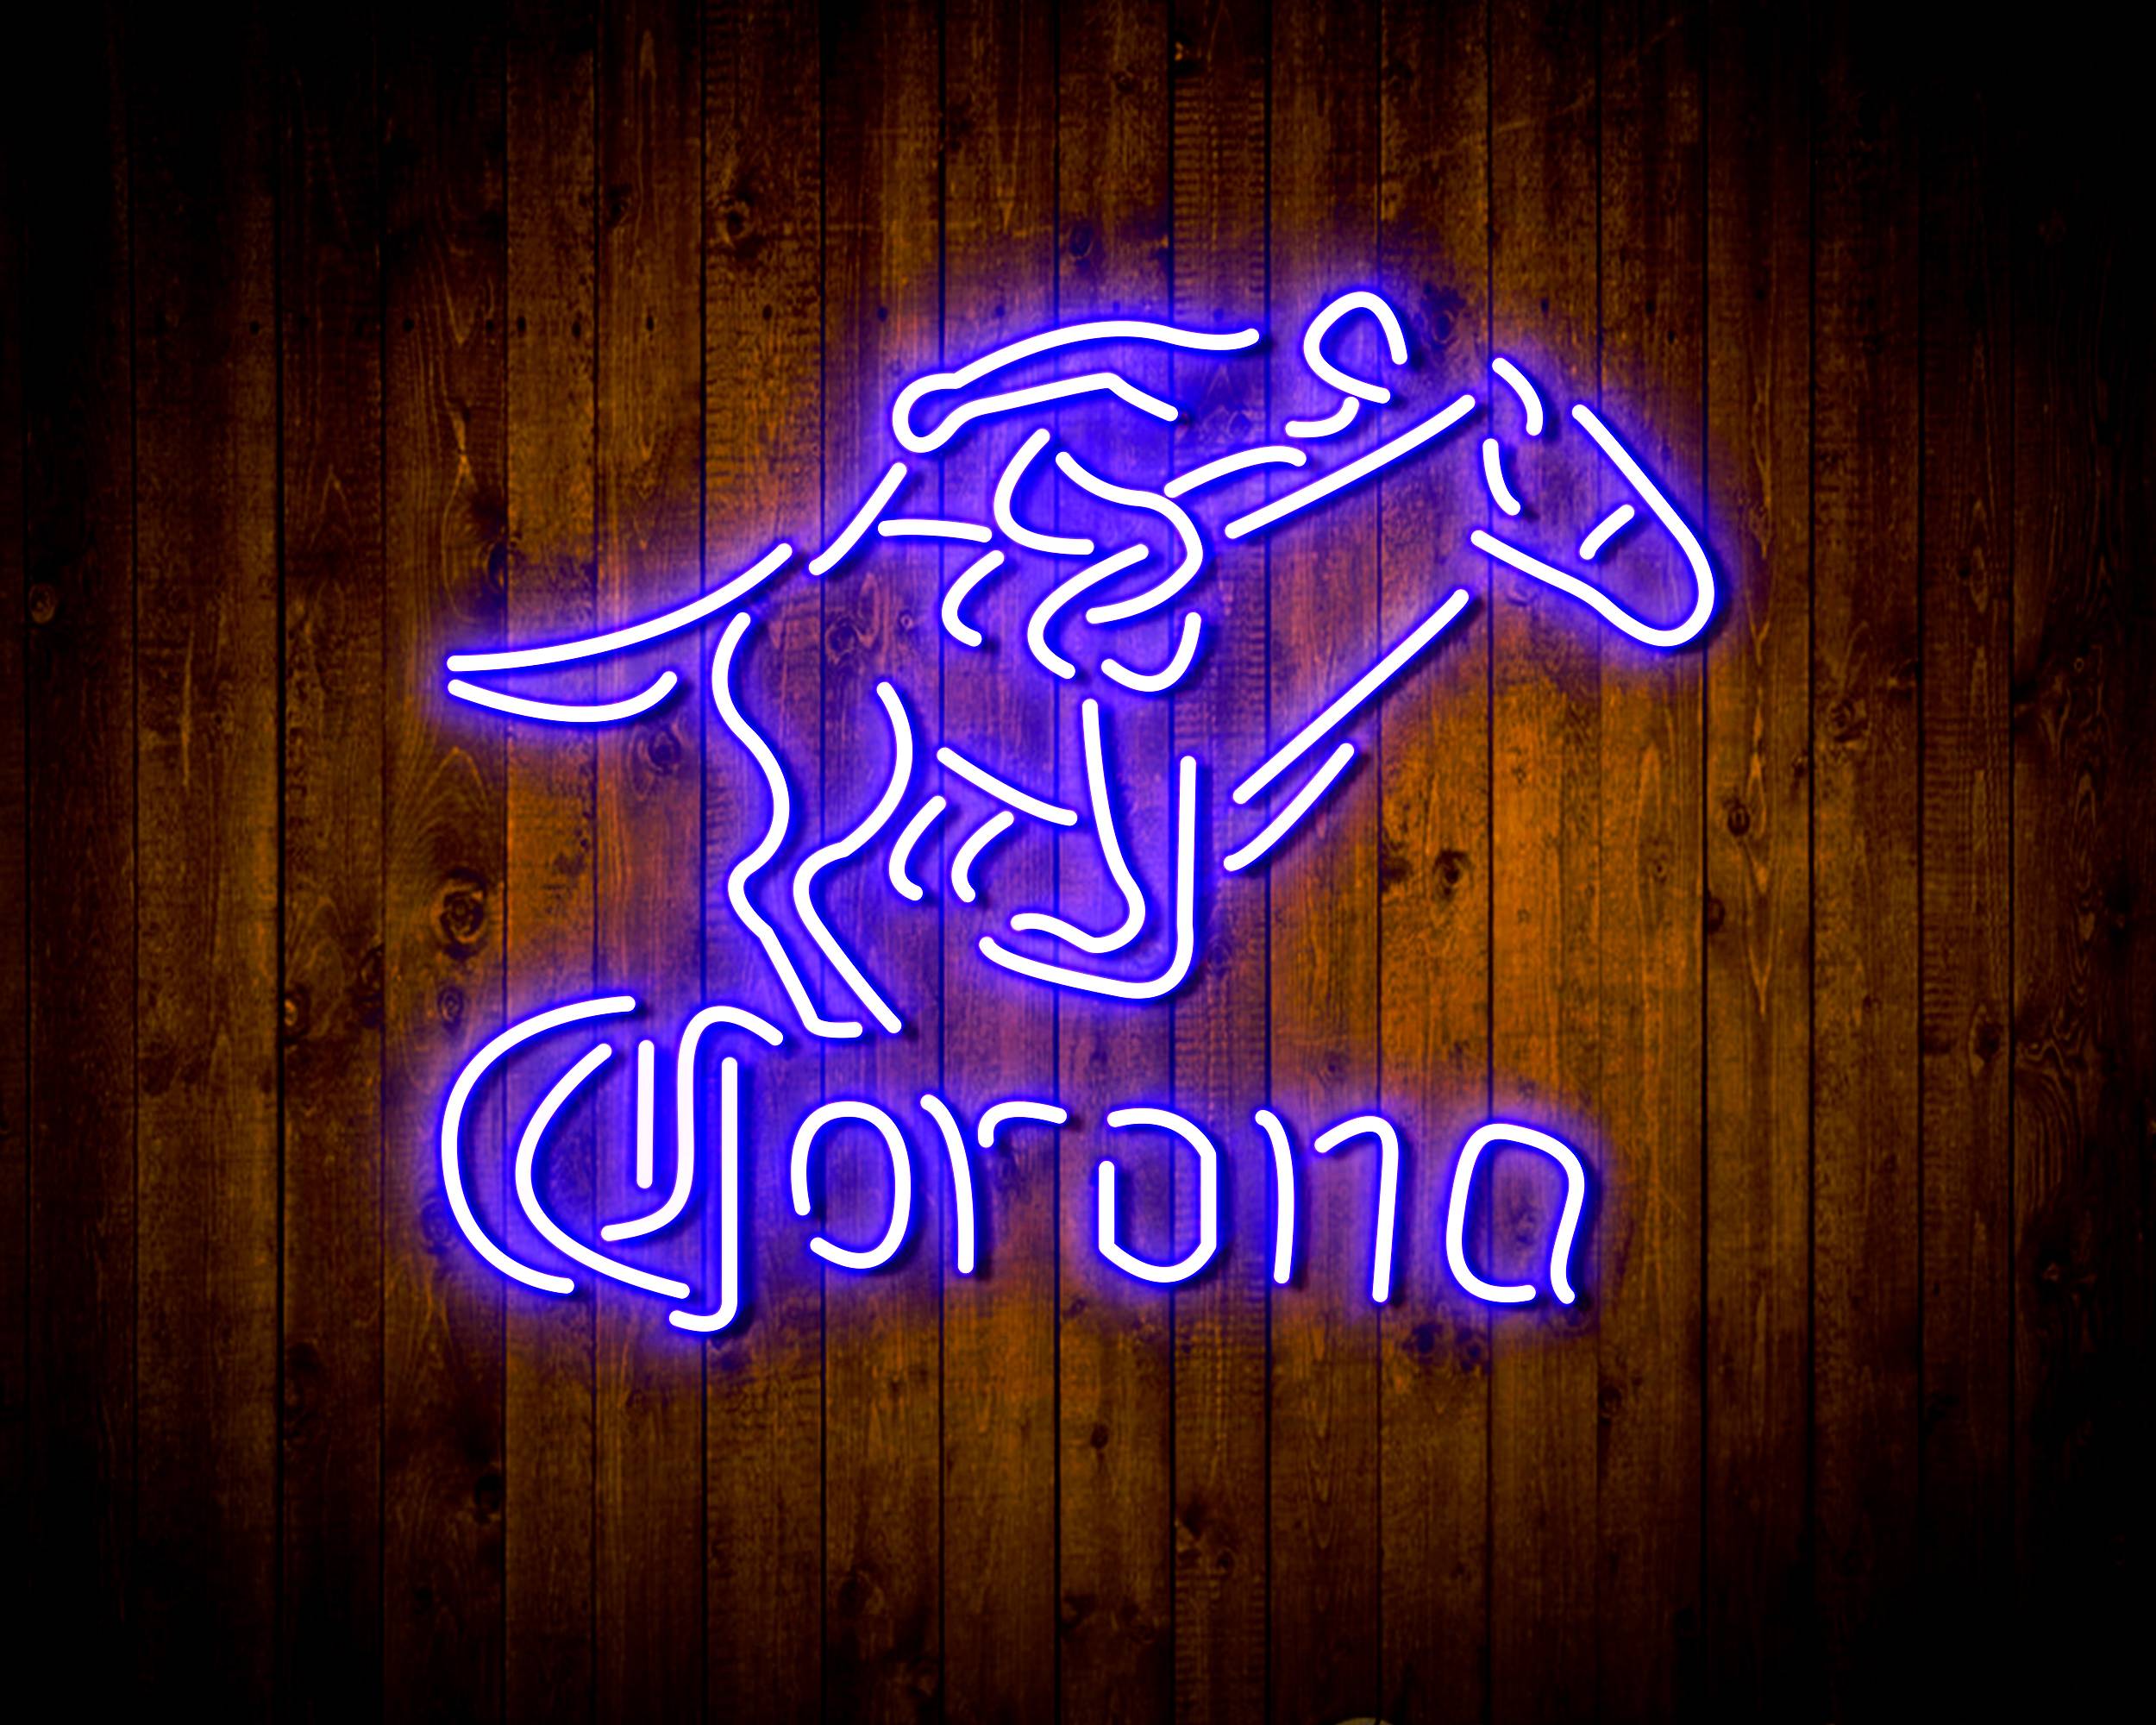 Croona with Racing Horse Handmade Neon Flex LED Sign